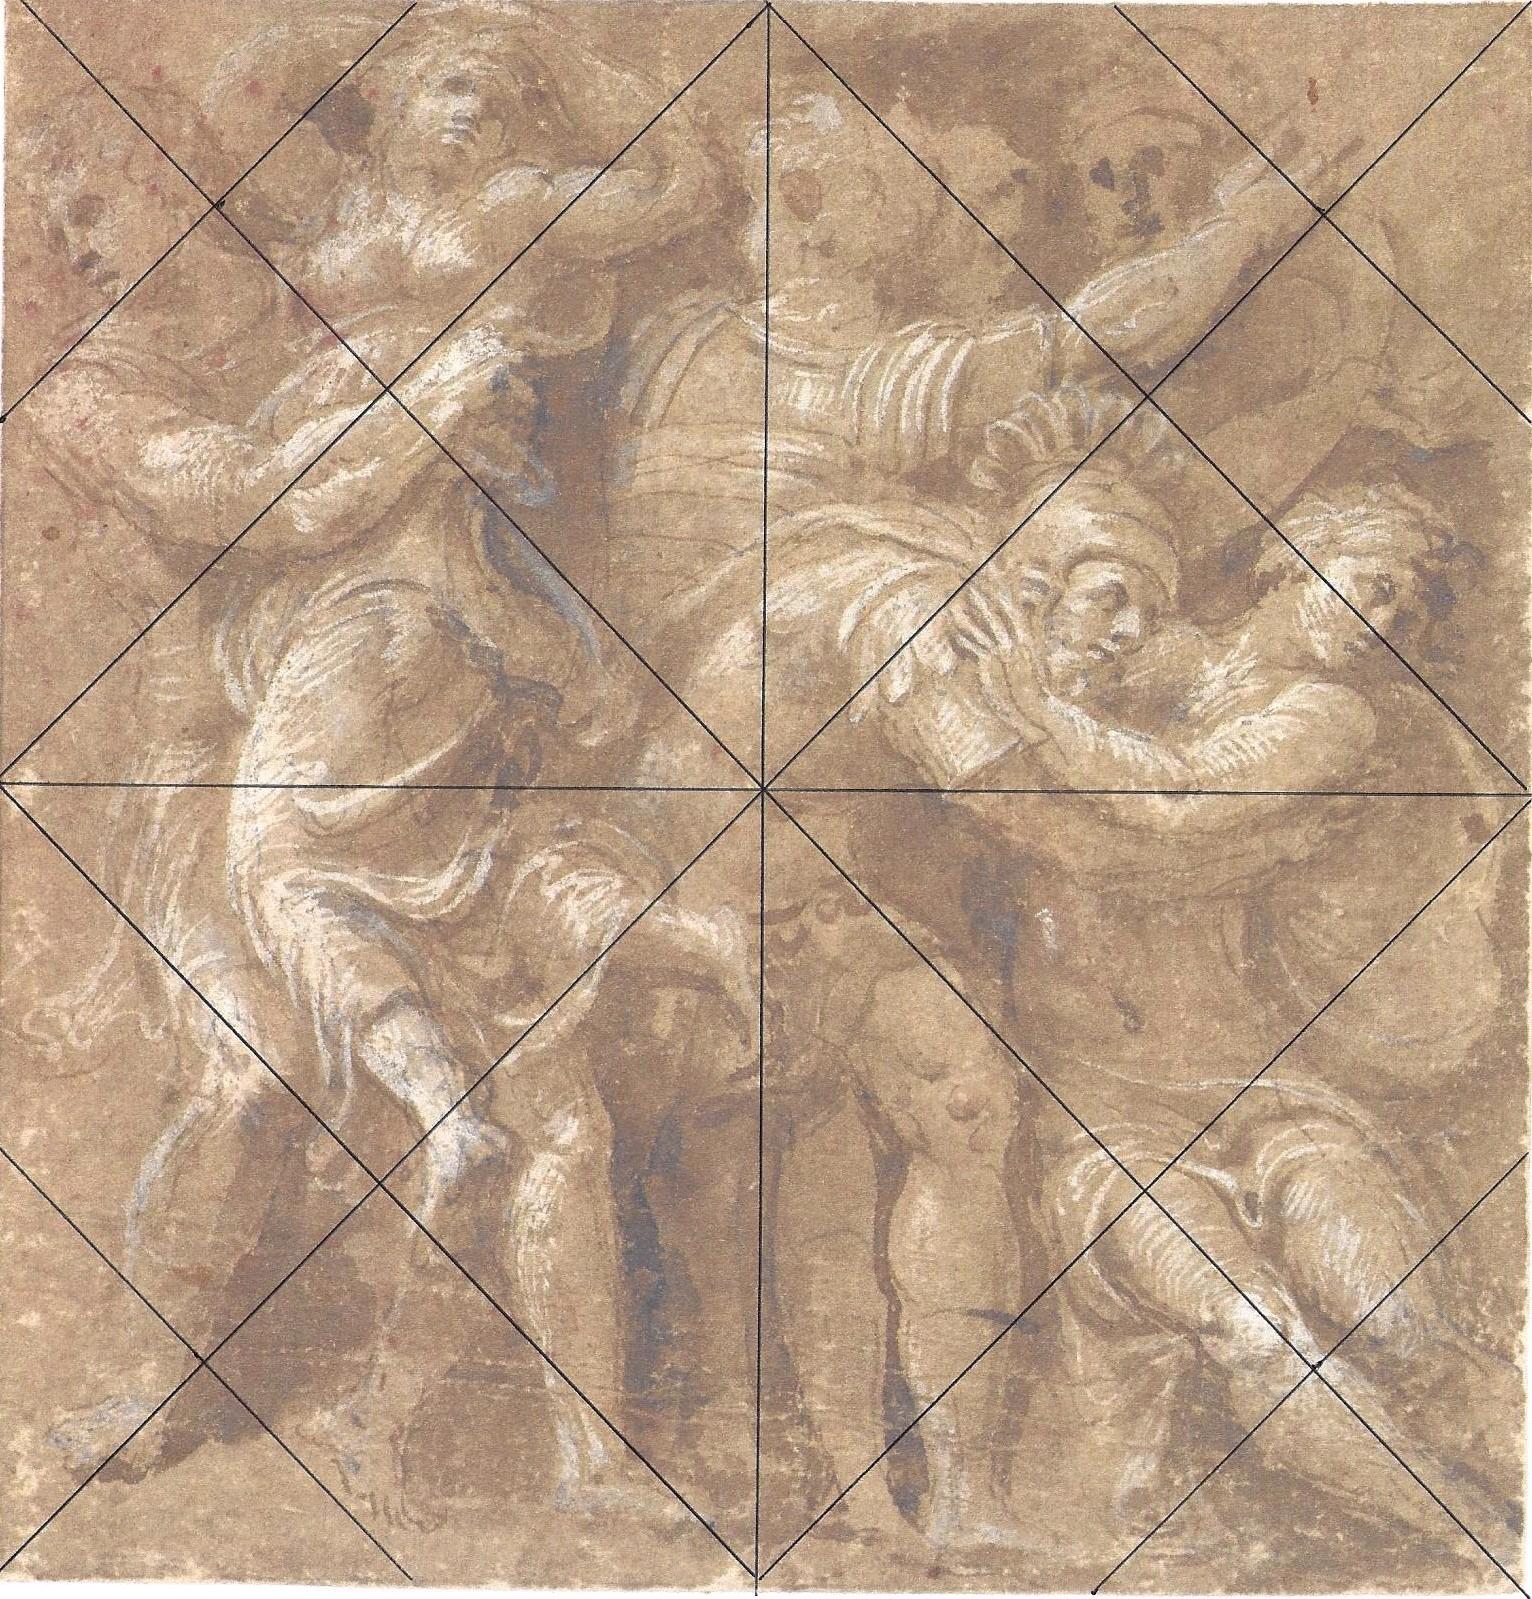 The Abduction of the Sabine Women , a Renaissance drawing by Biagio Pupini For Sale 5